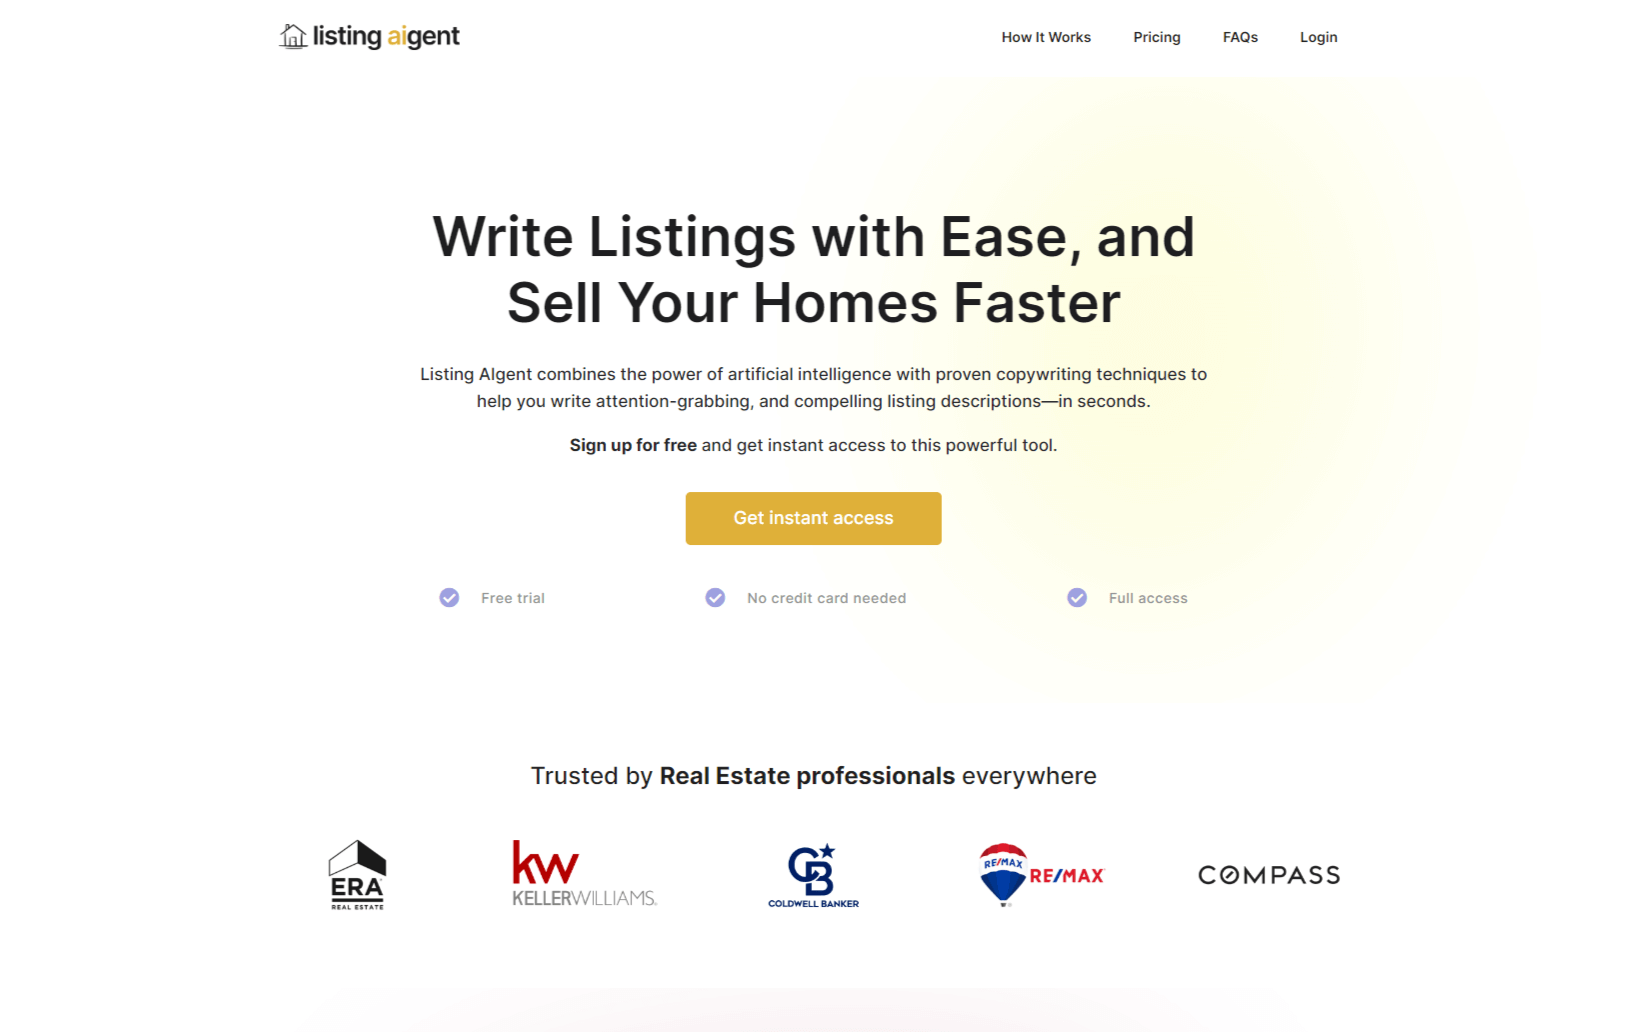 Listing AIgent Real Estate Copy Writing Tool